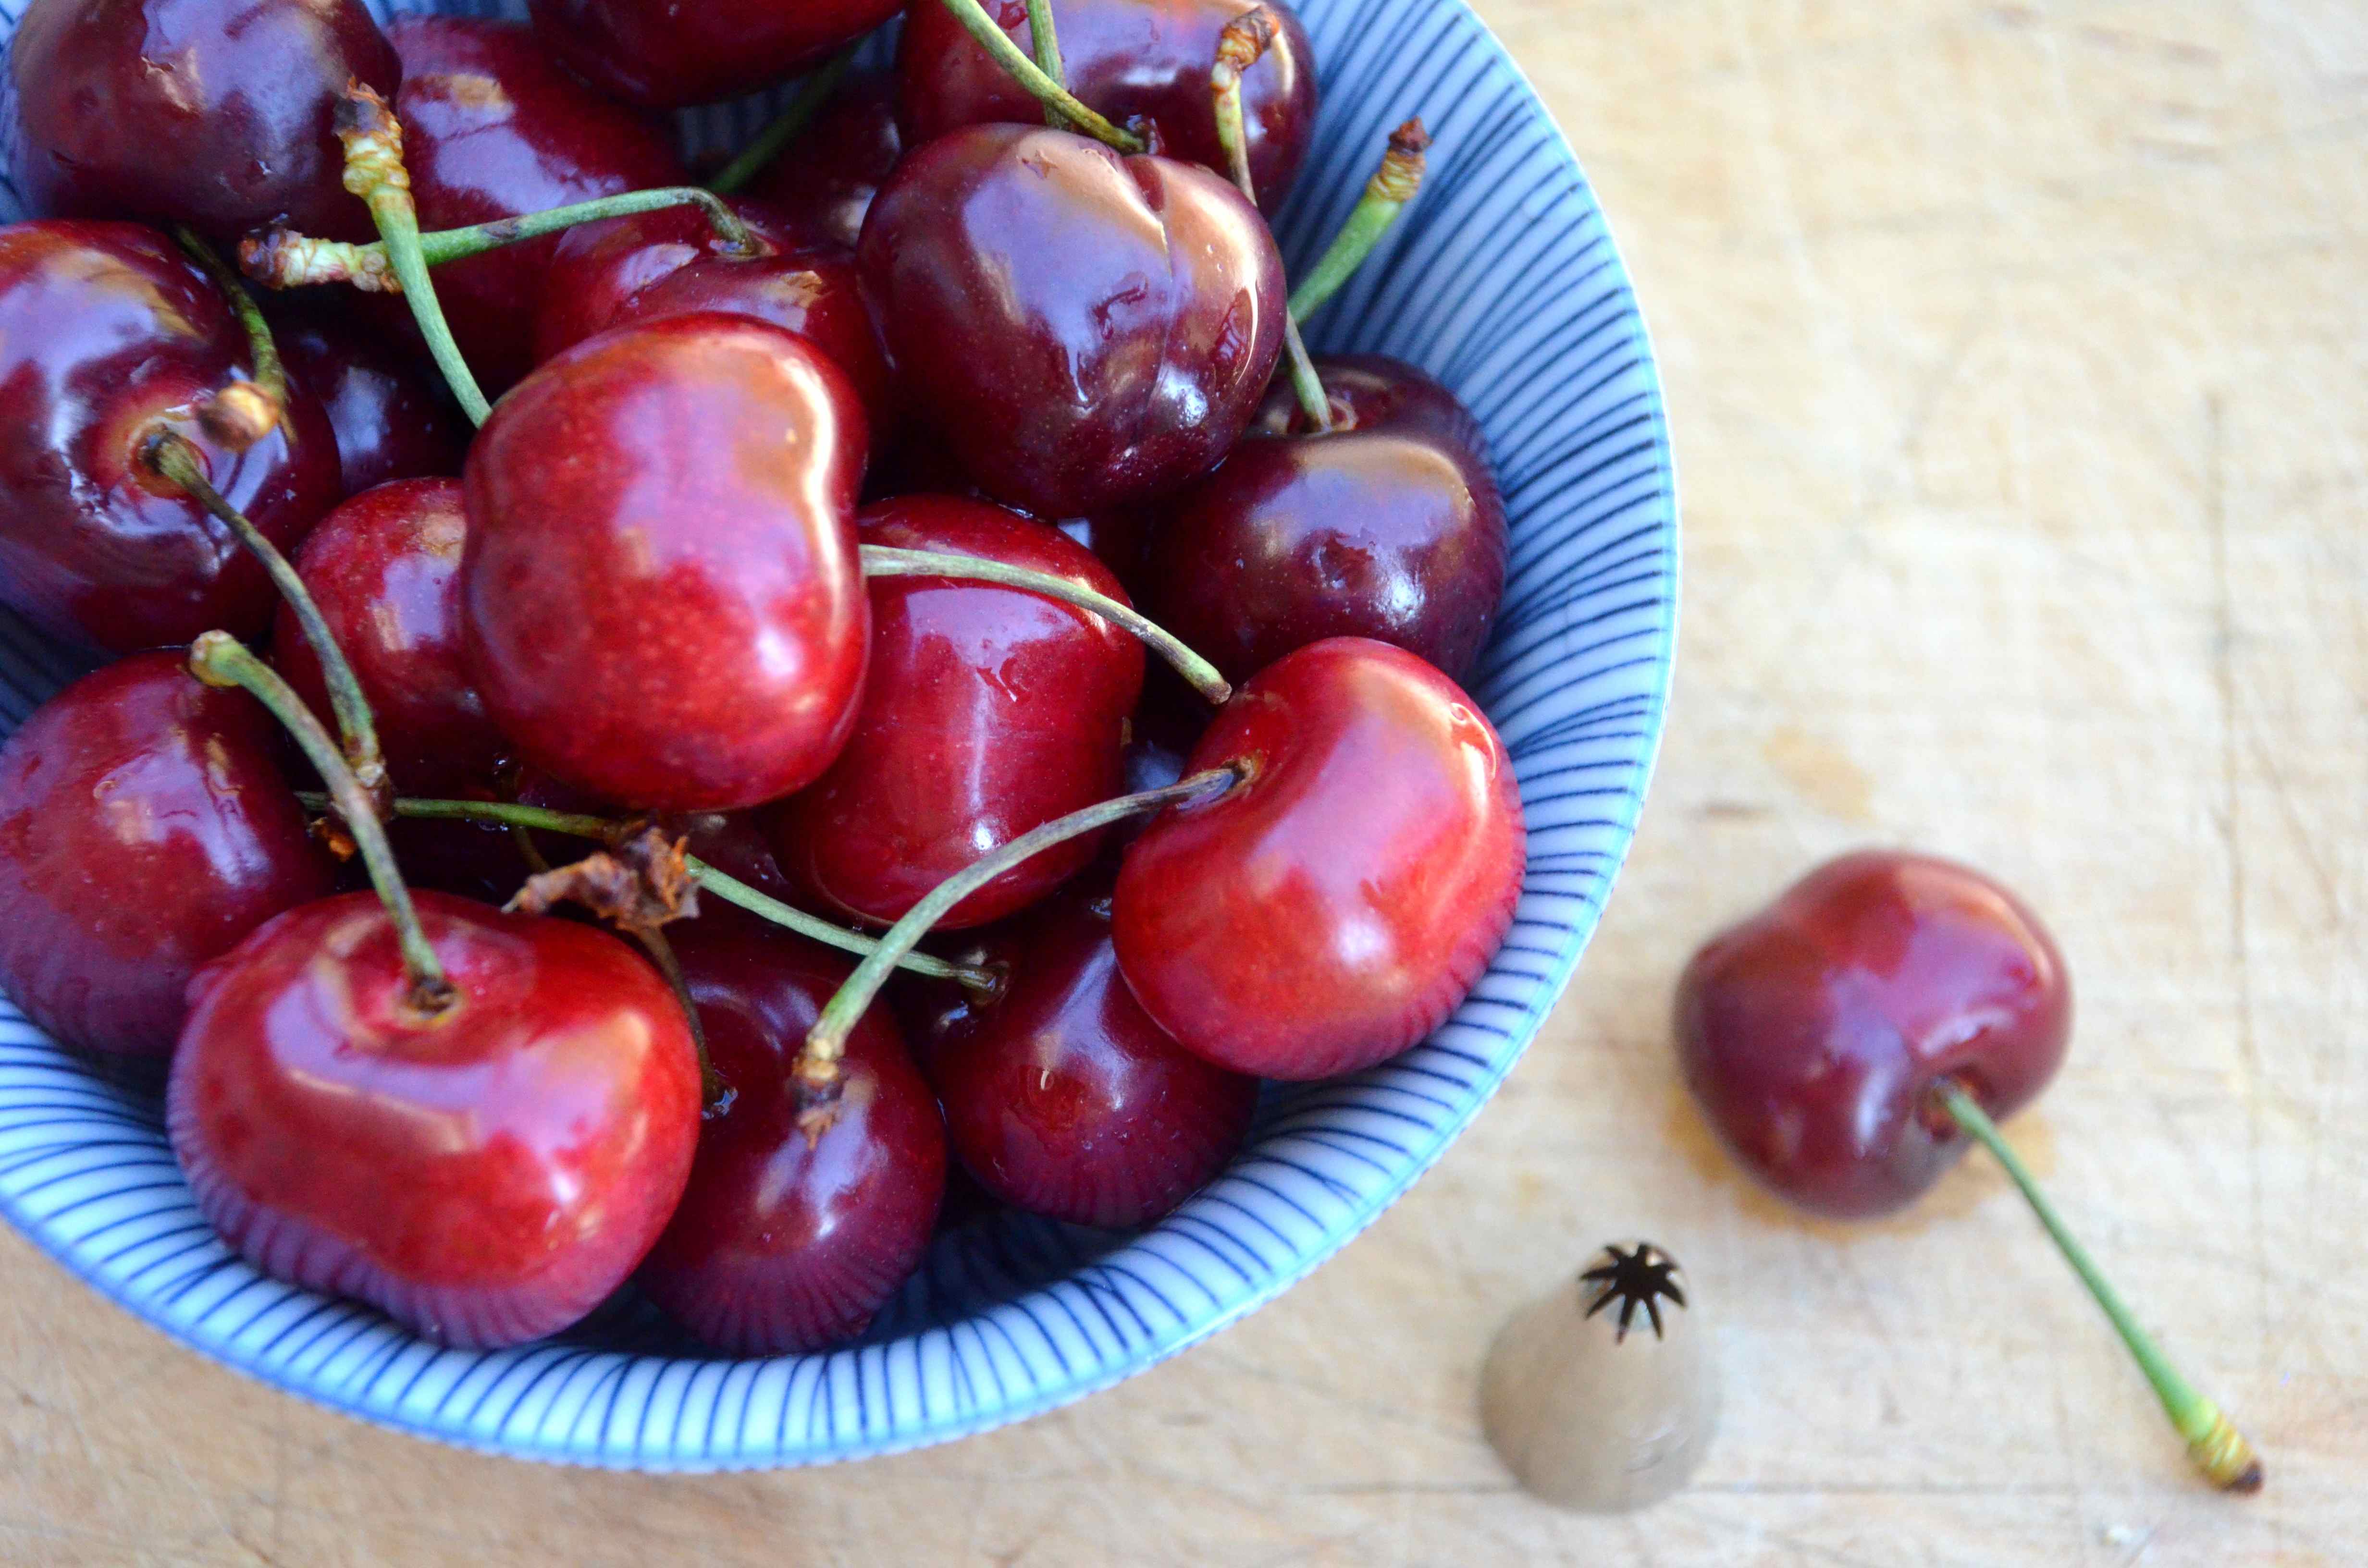 How to pit cherries without a pitter: Step 1